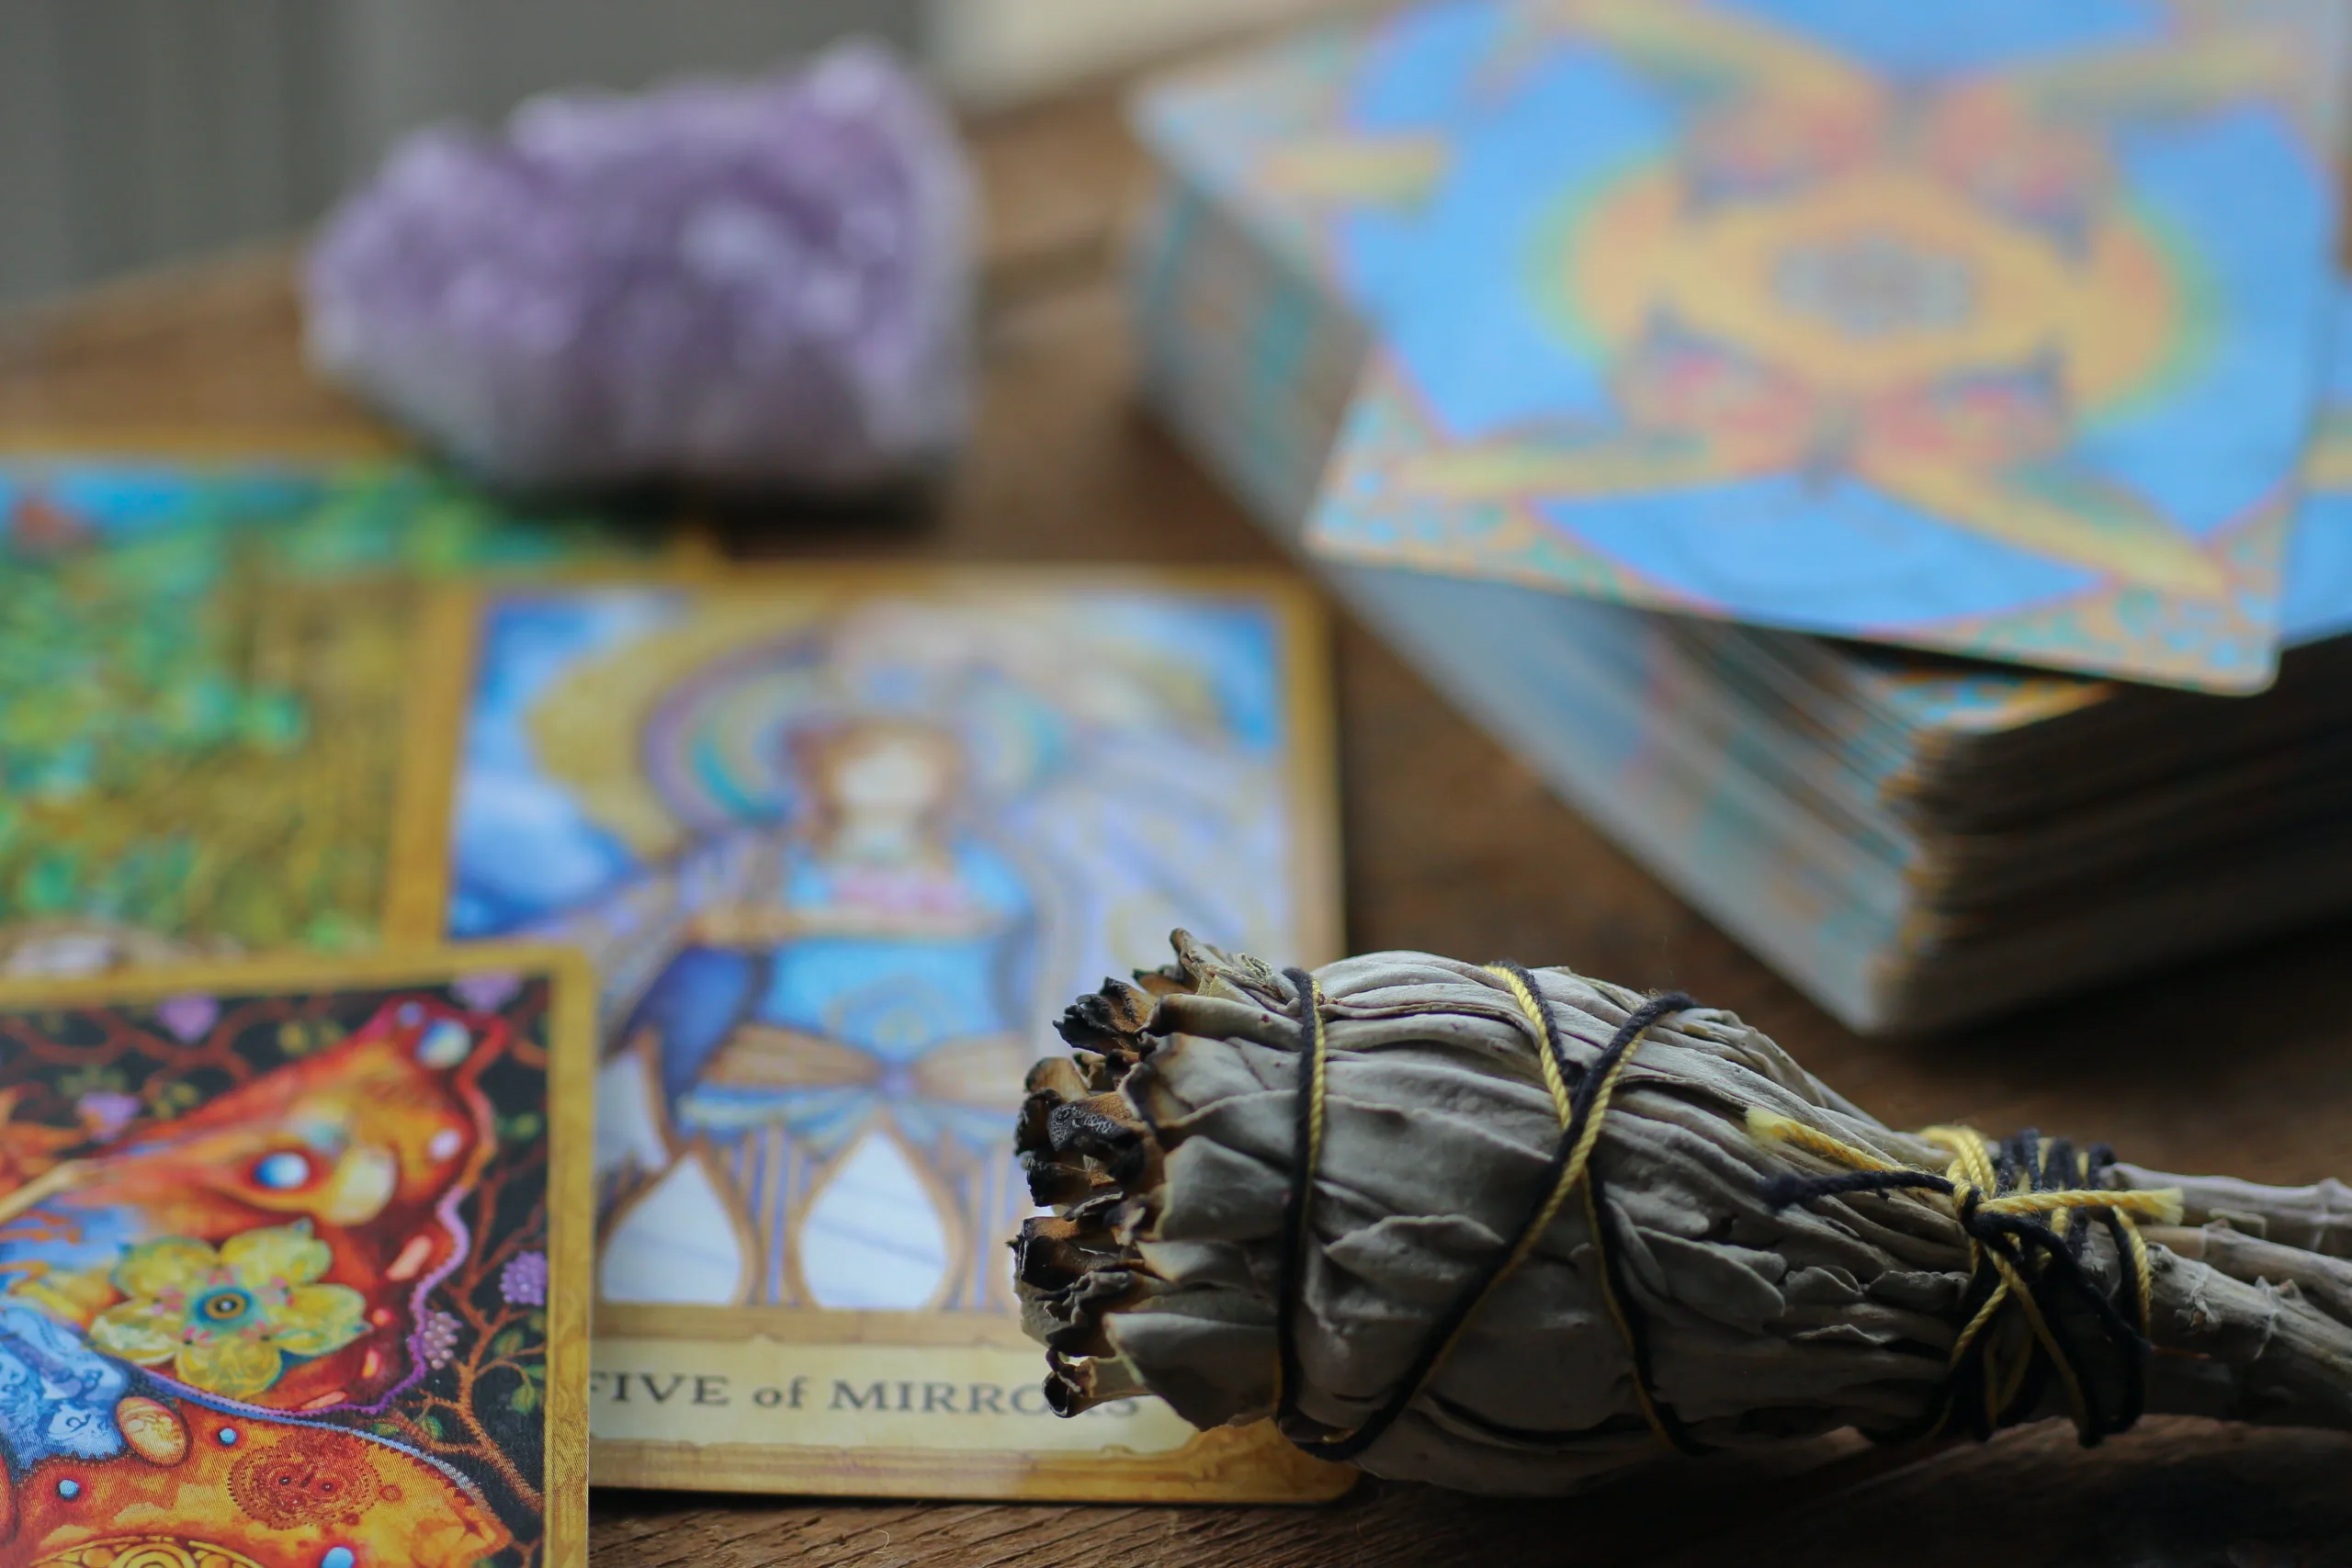 Who is the target audience for tarot cards?